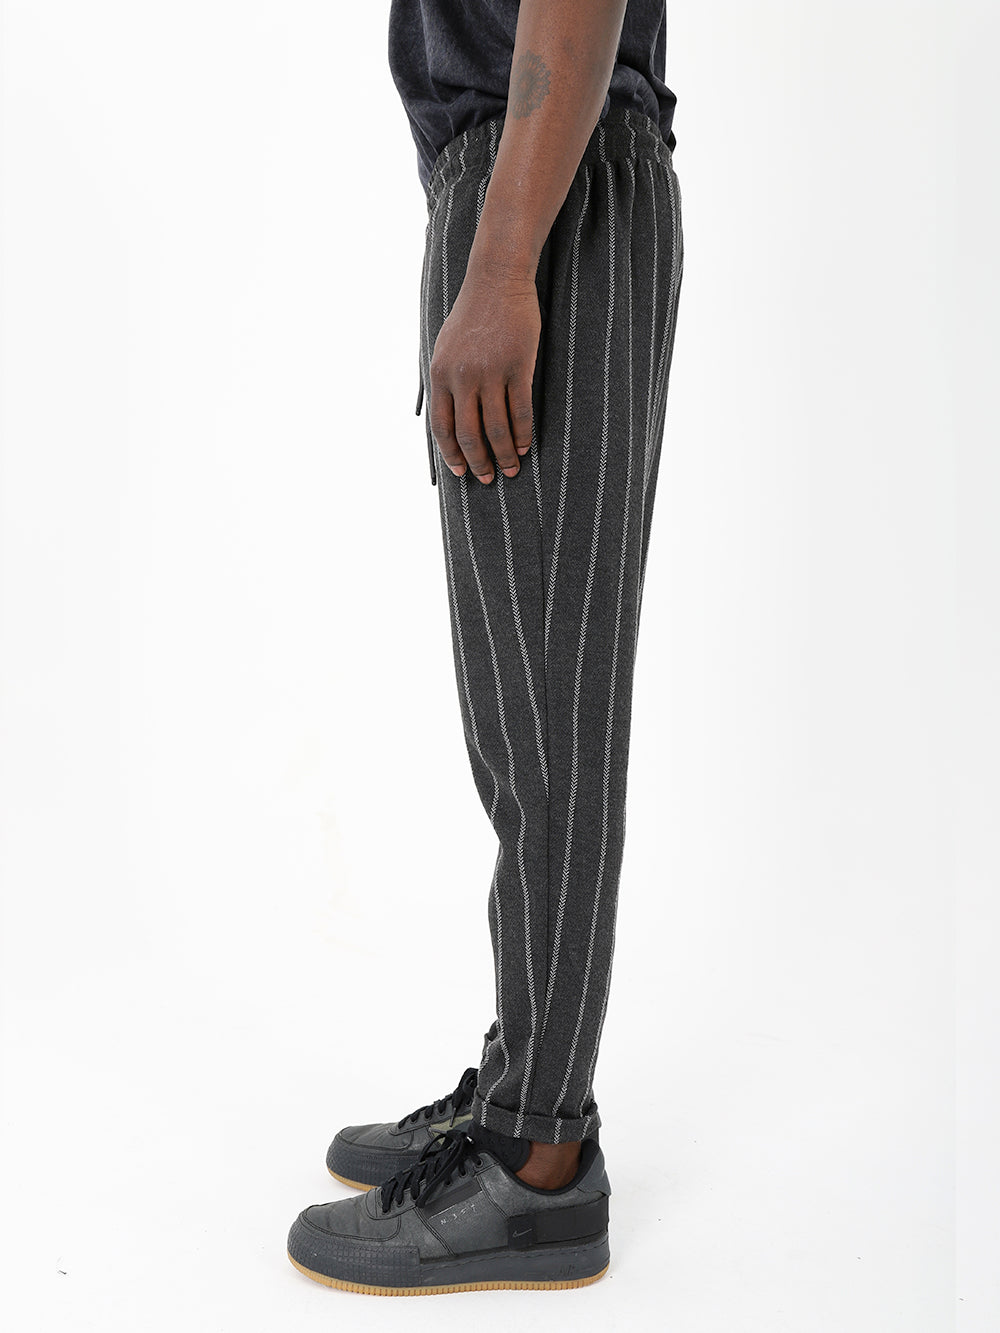 A man wearing a black and white striped POLARITY JOGGERS.